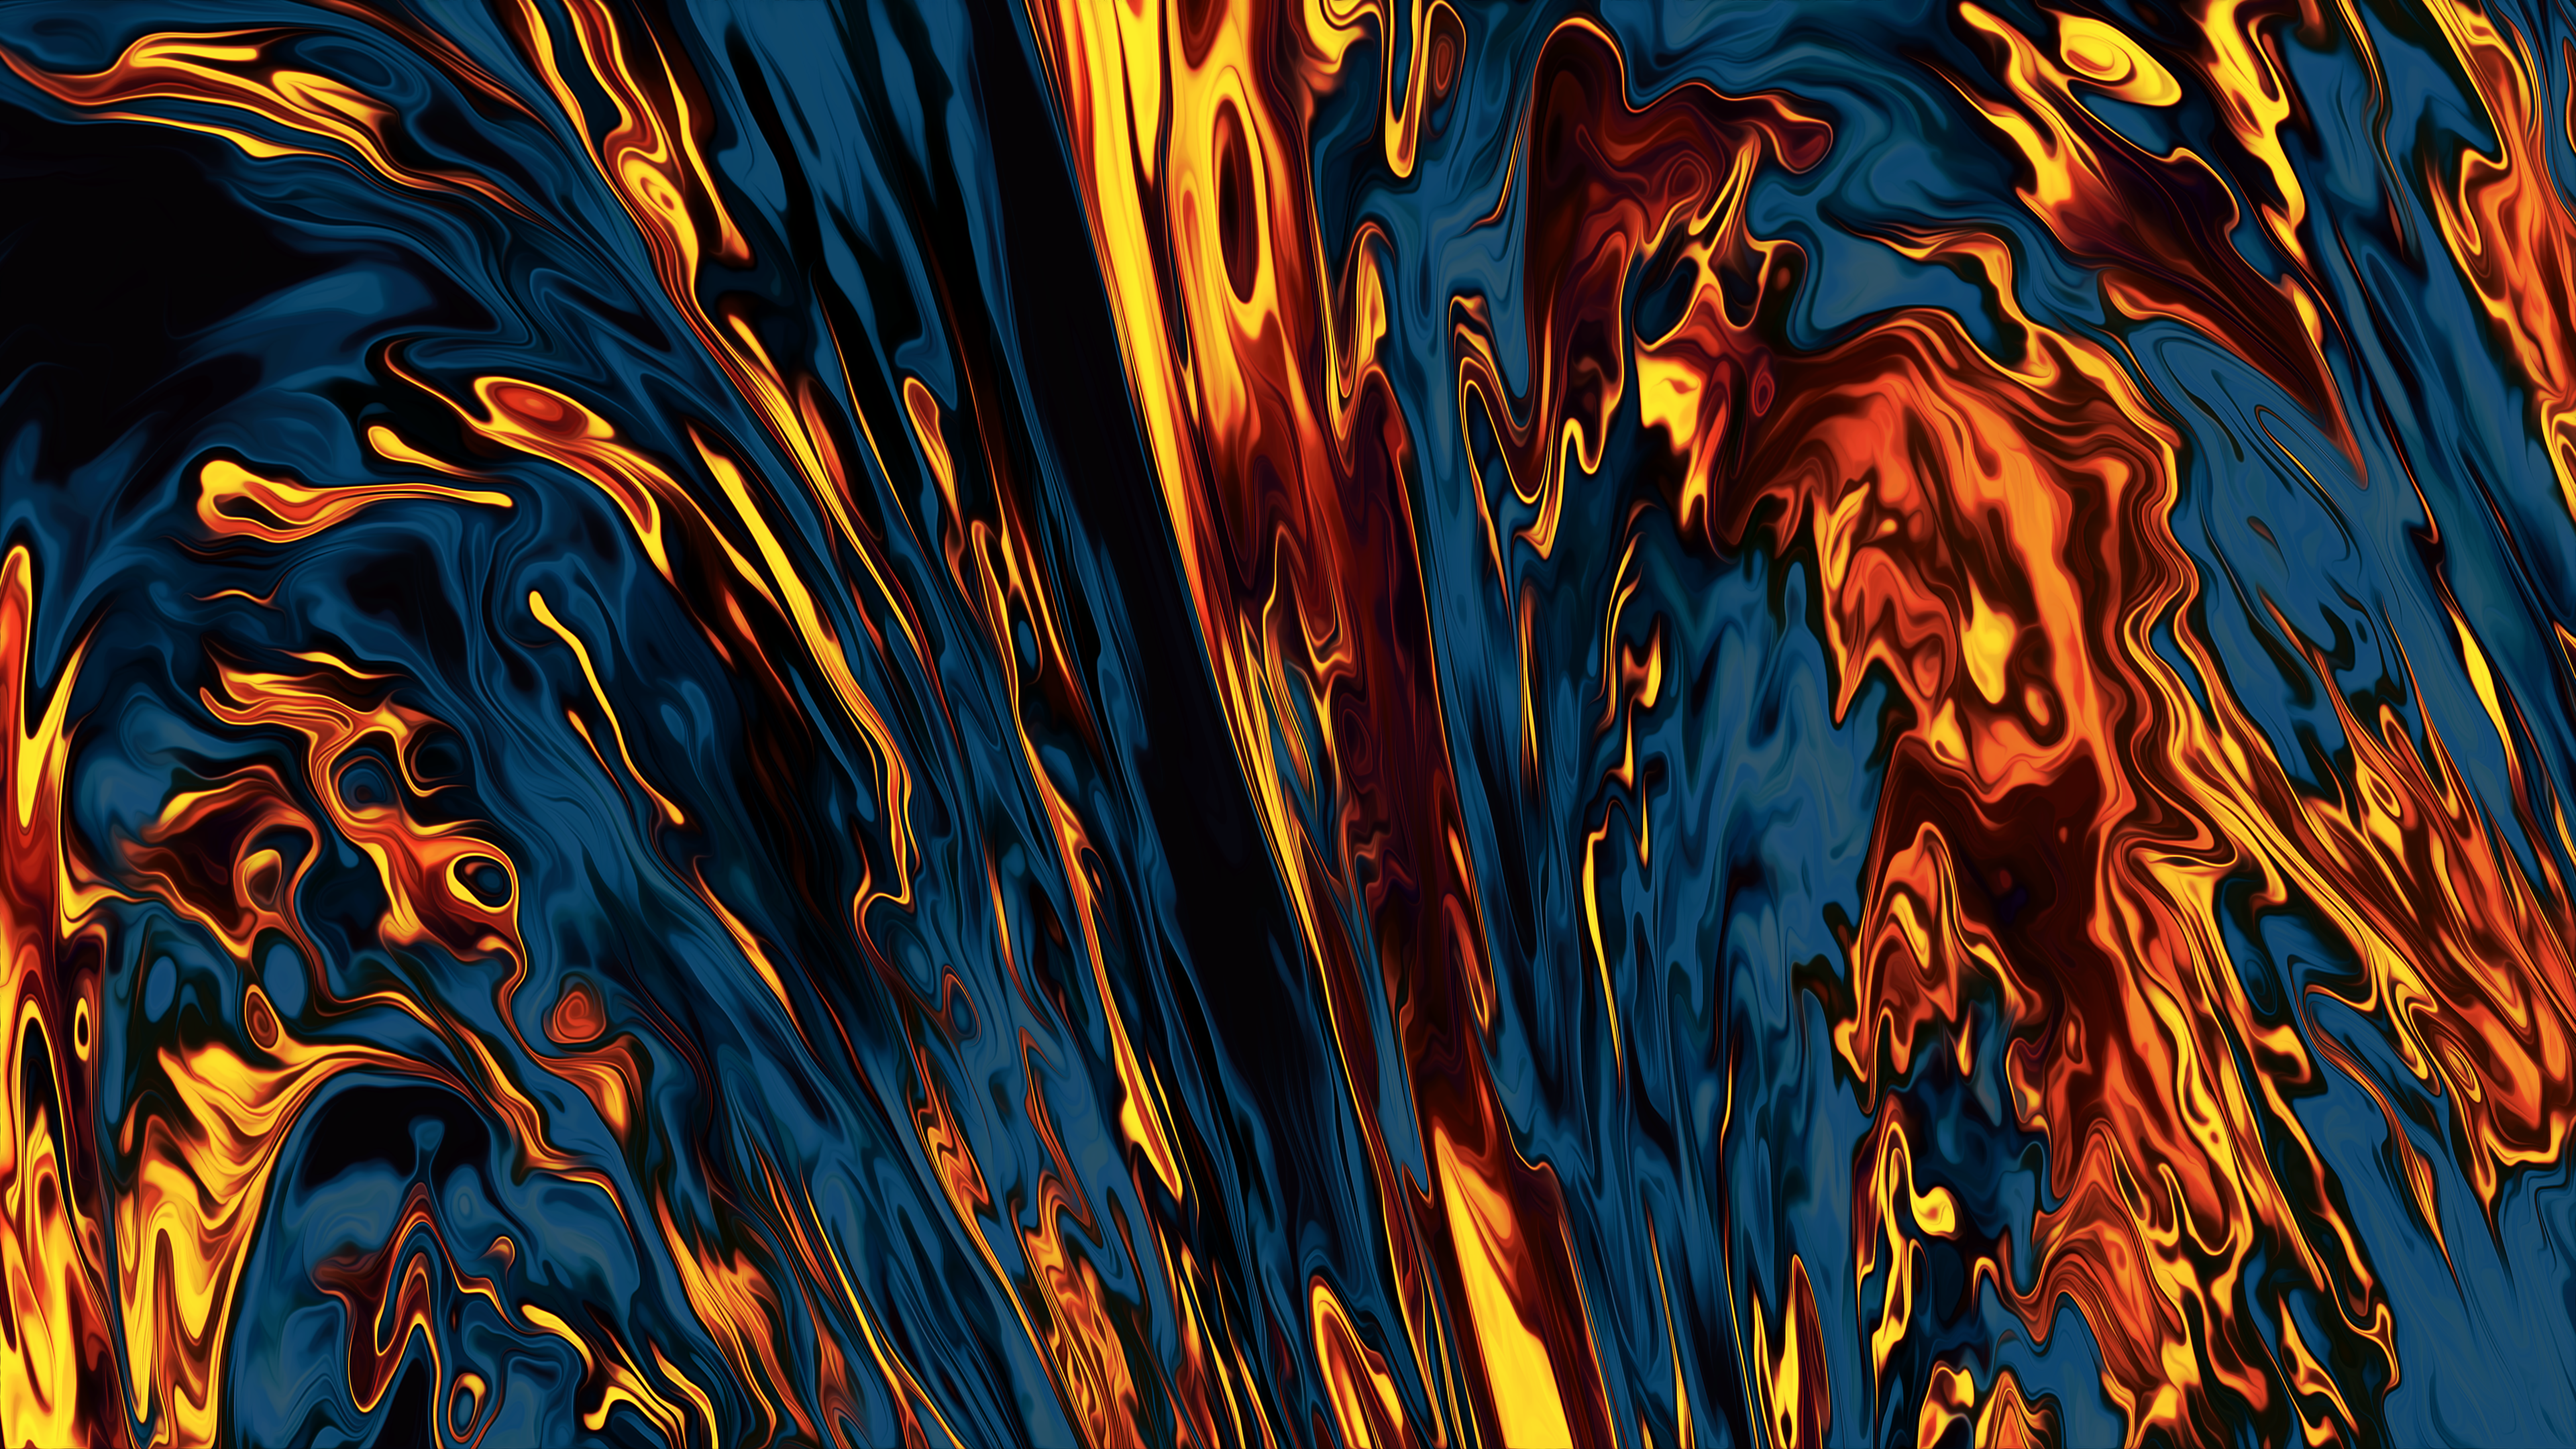 Wavy Wavy Lines Abstract Colorful Digital Art 3840x2160